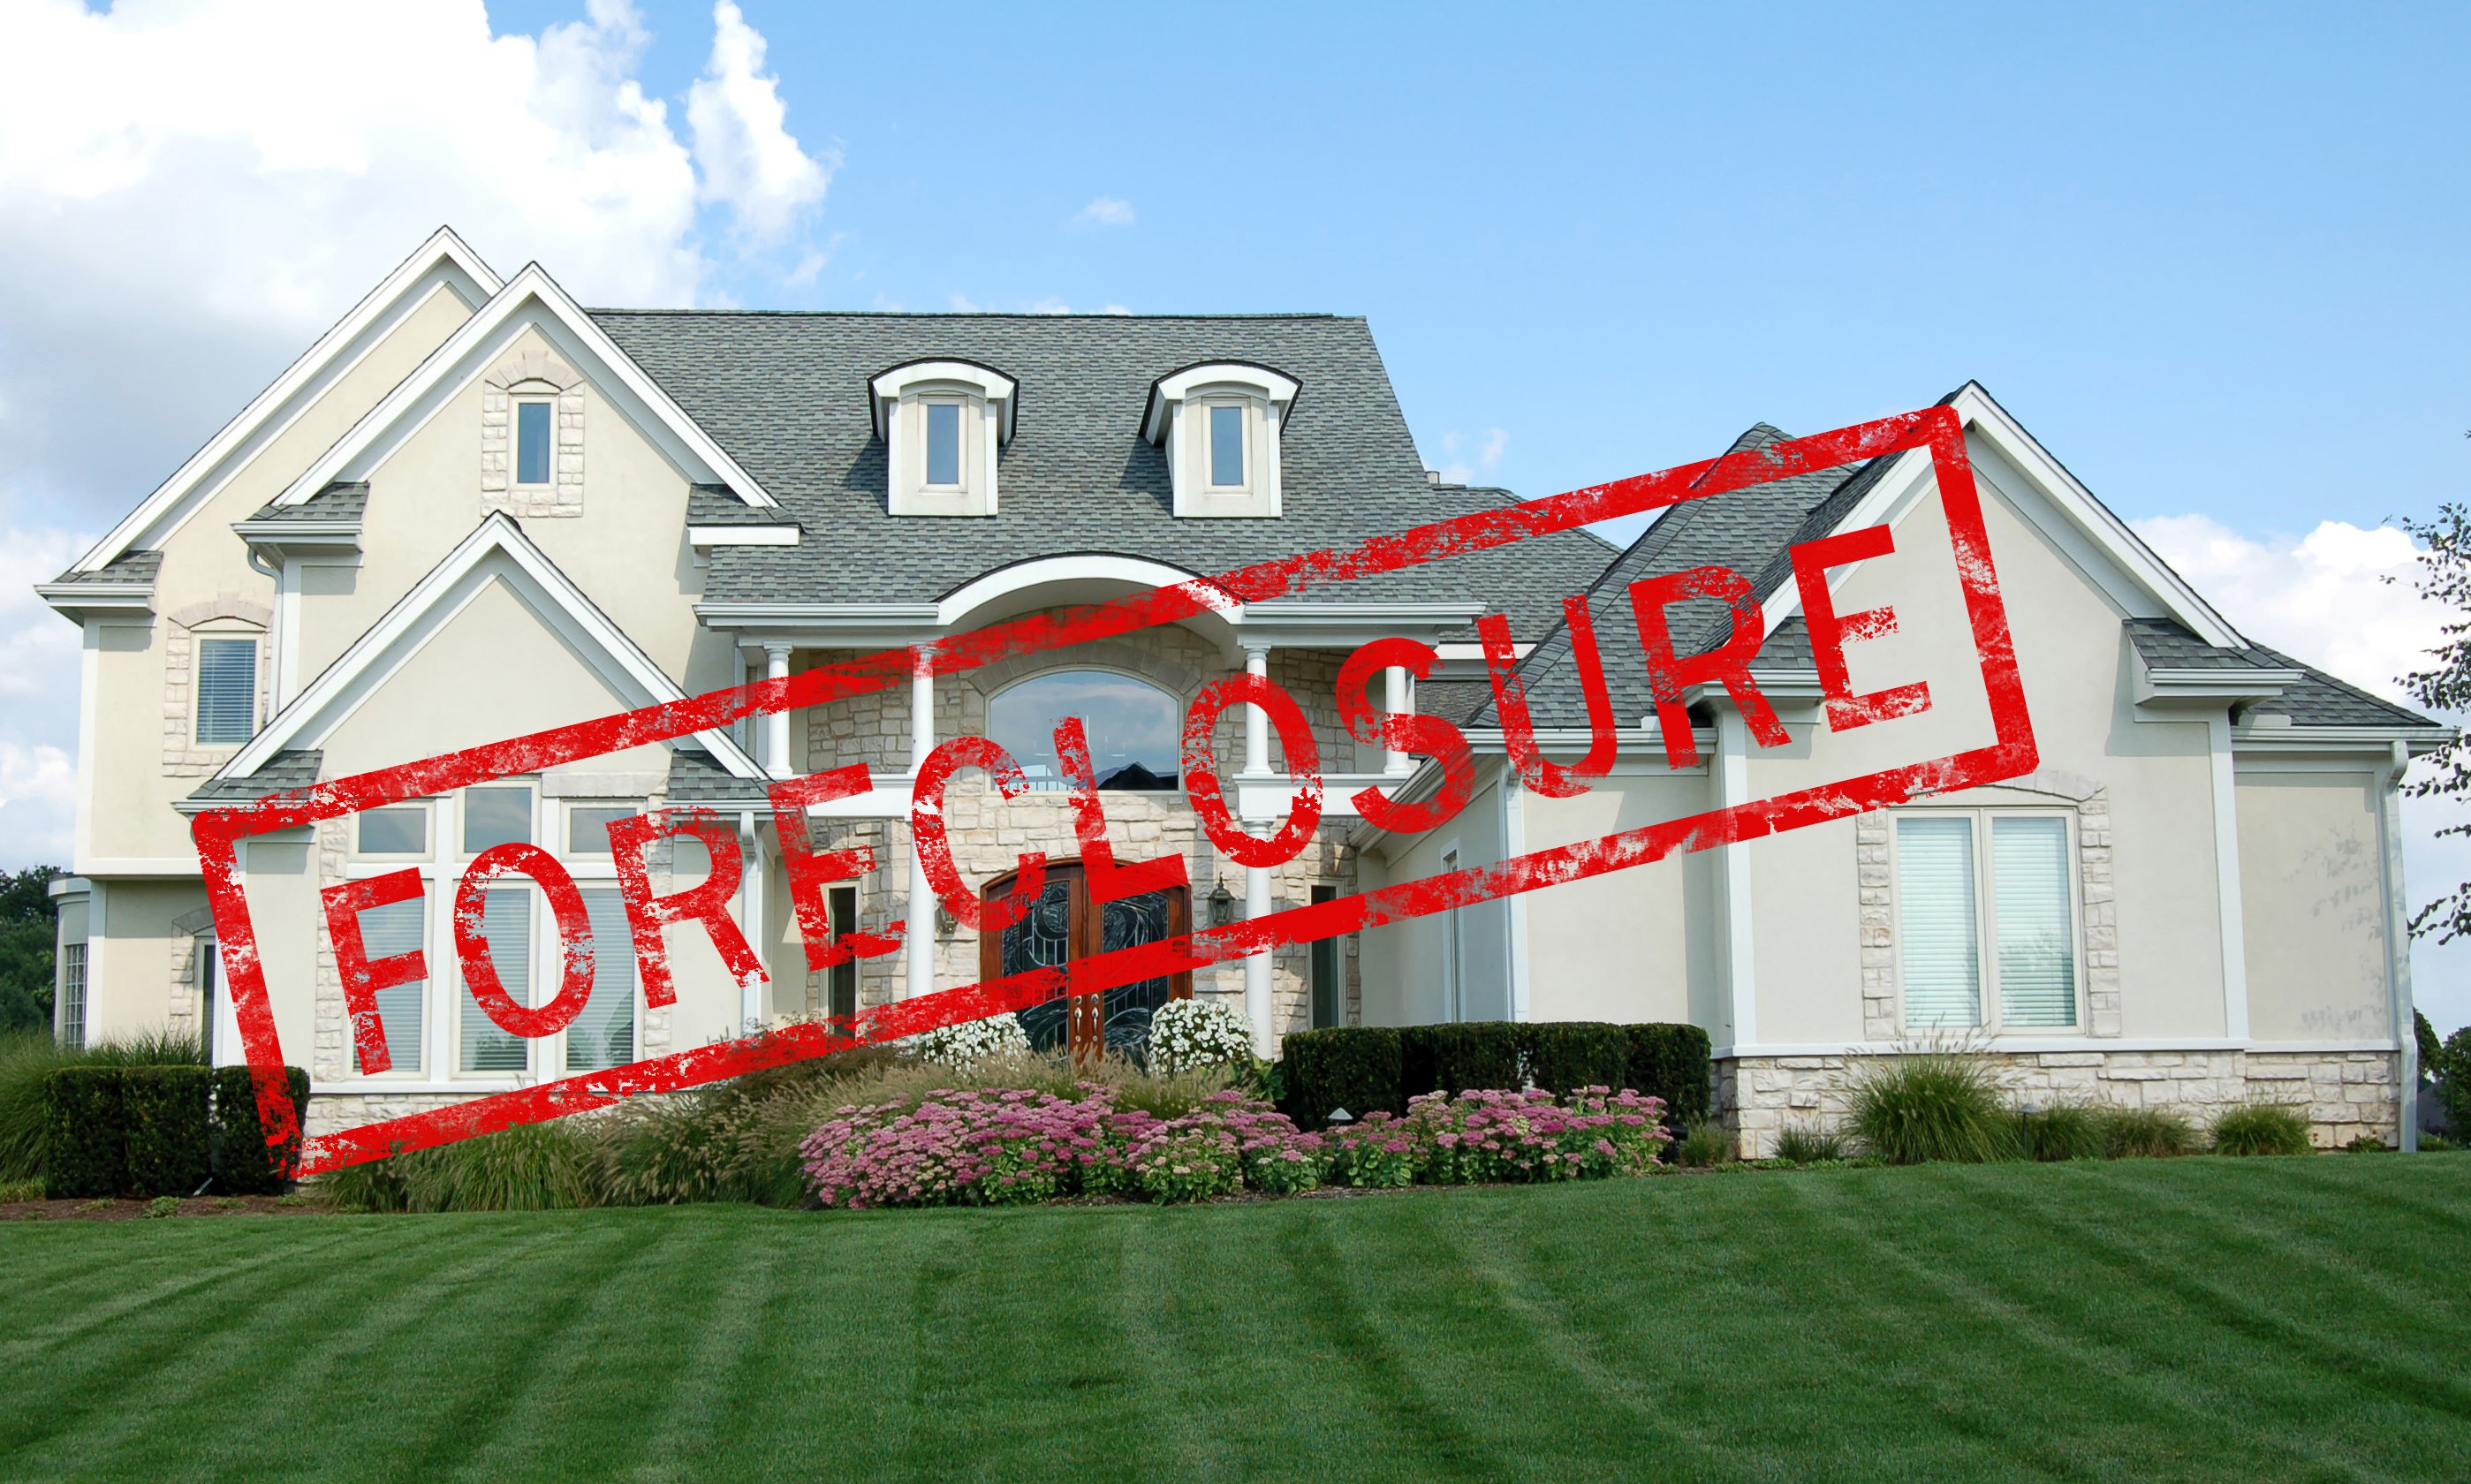 Call Gold Coast Appraisal Group LLC to order appraisals of Bergen foreclosures